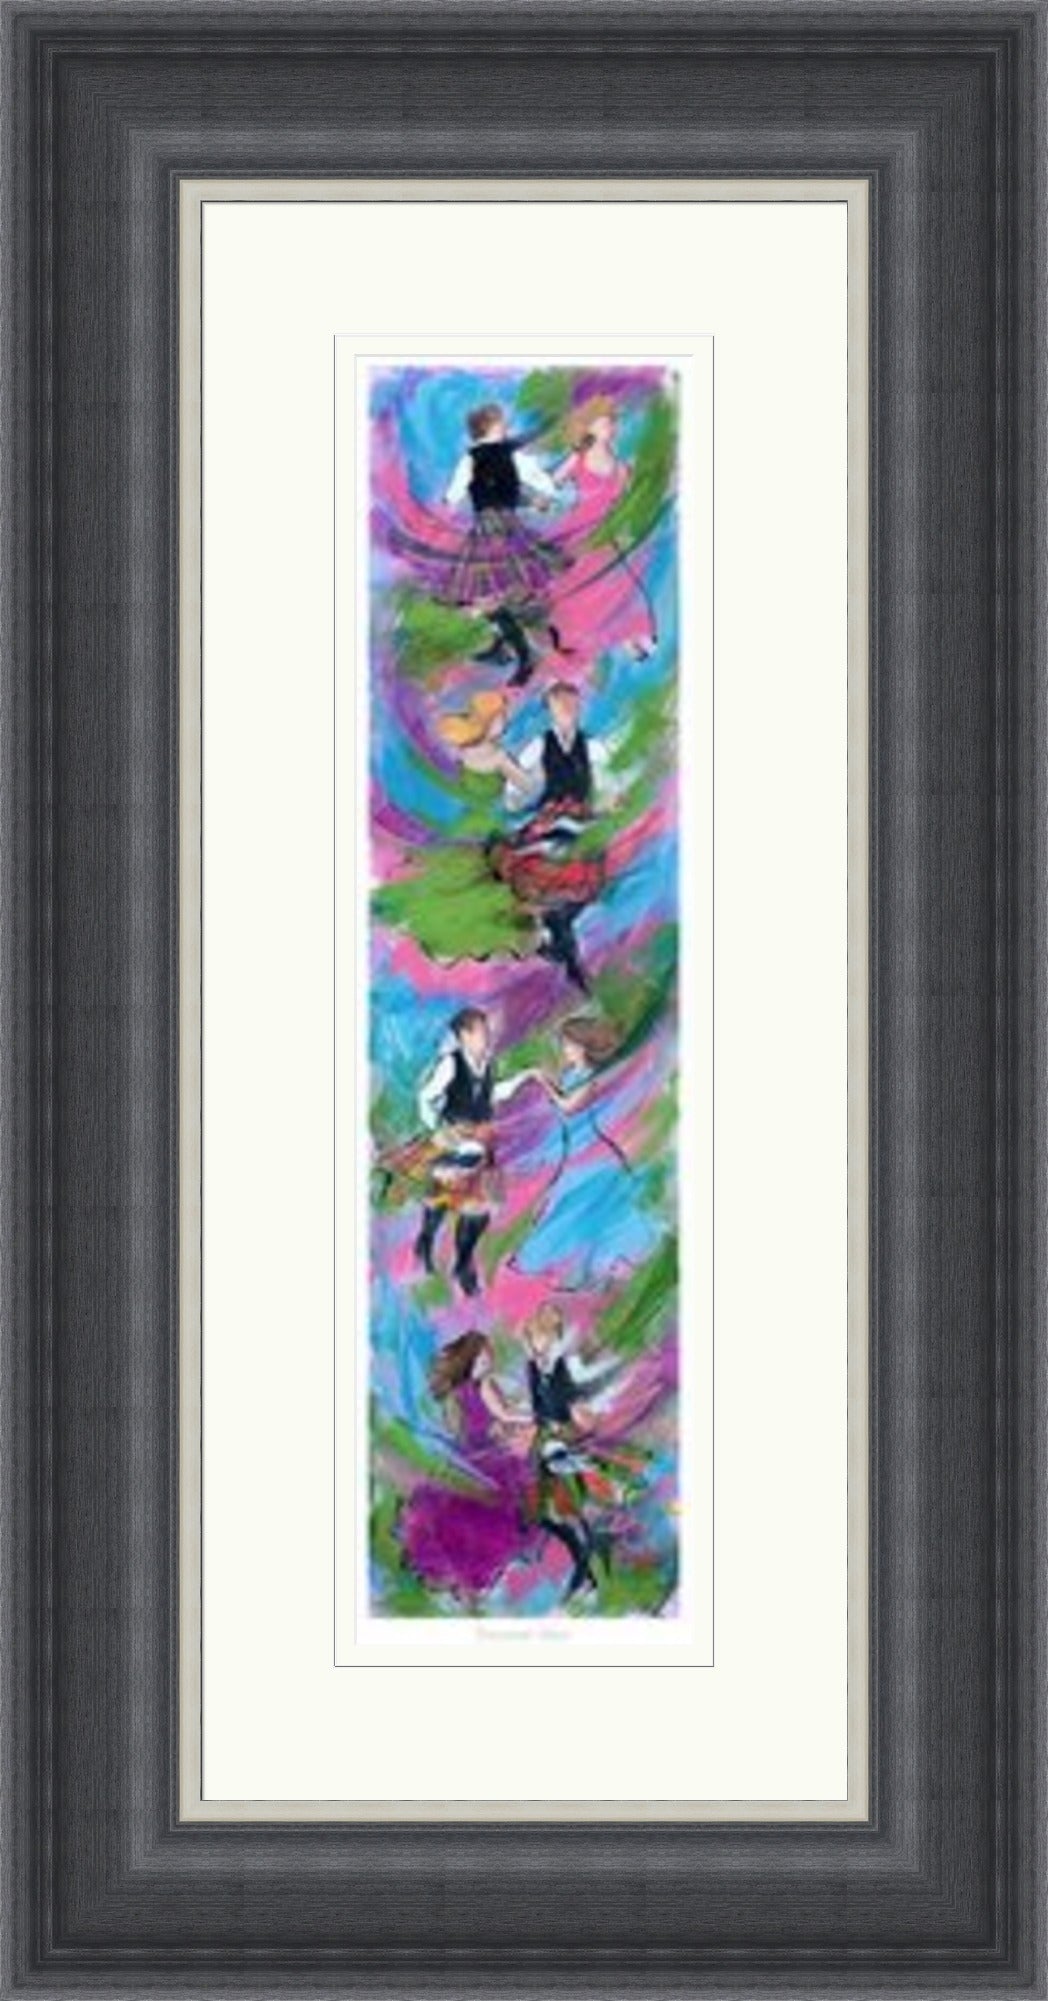 Crossover Stack Ceilidh Dancing Art Print by Janet McCrorie